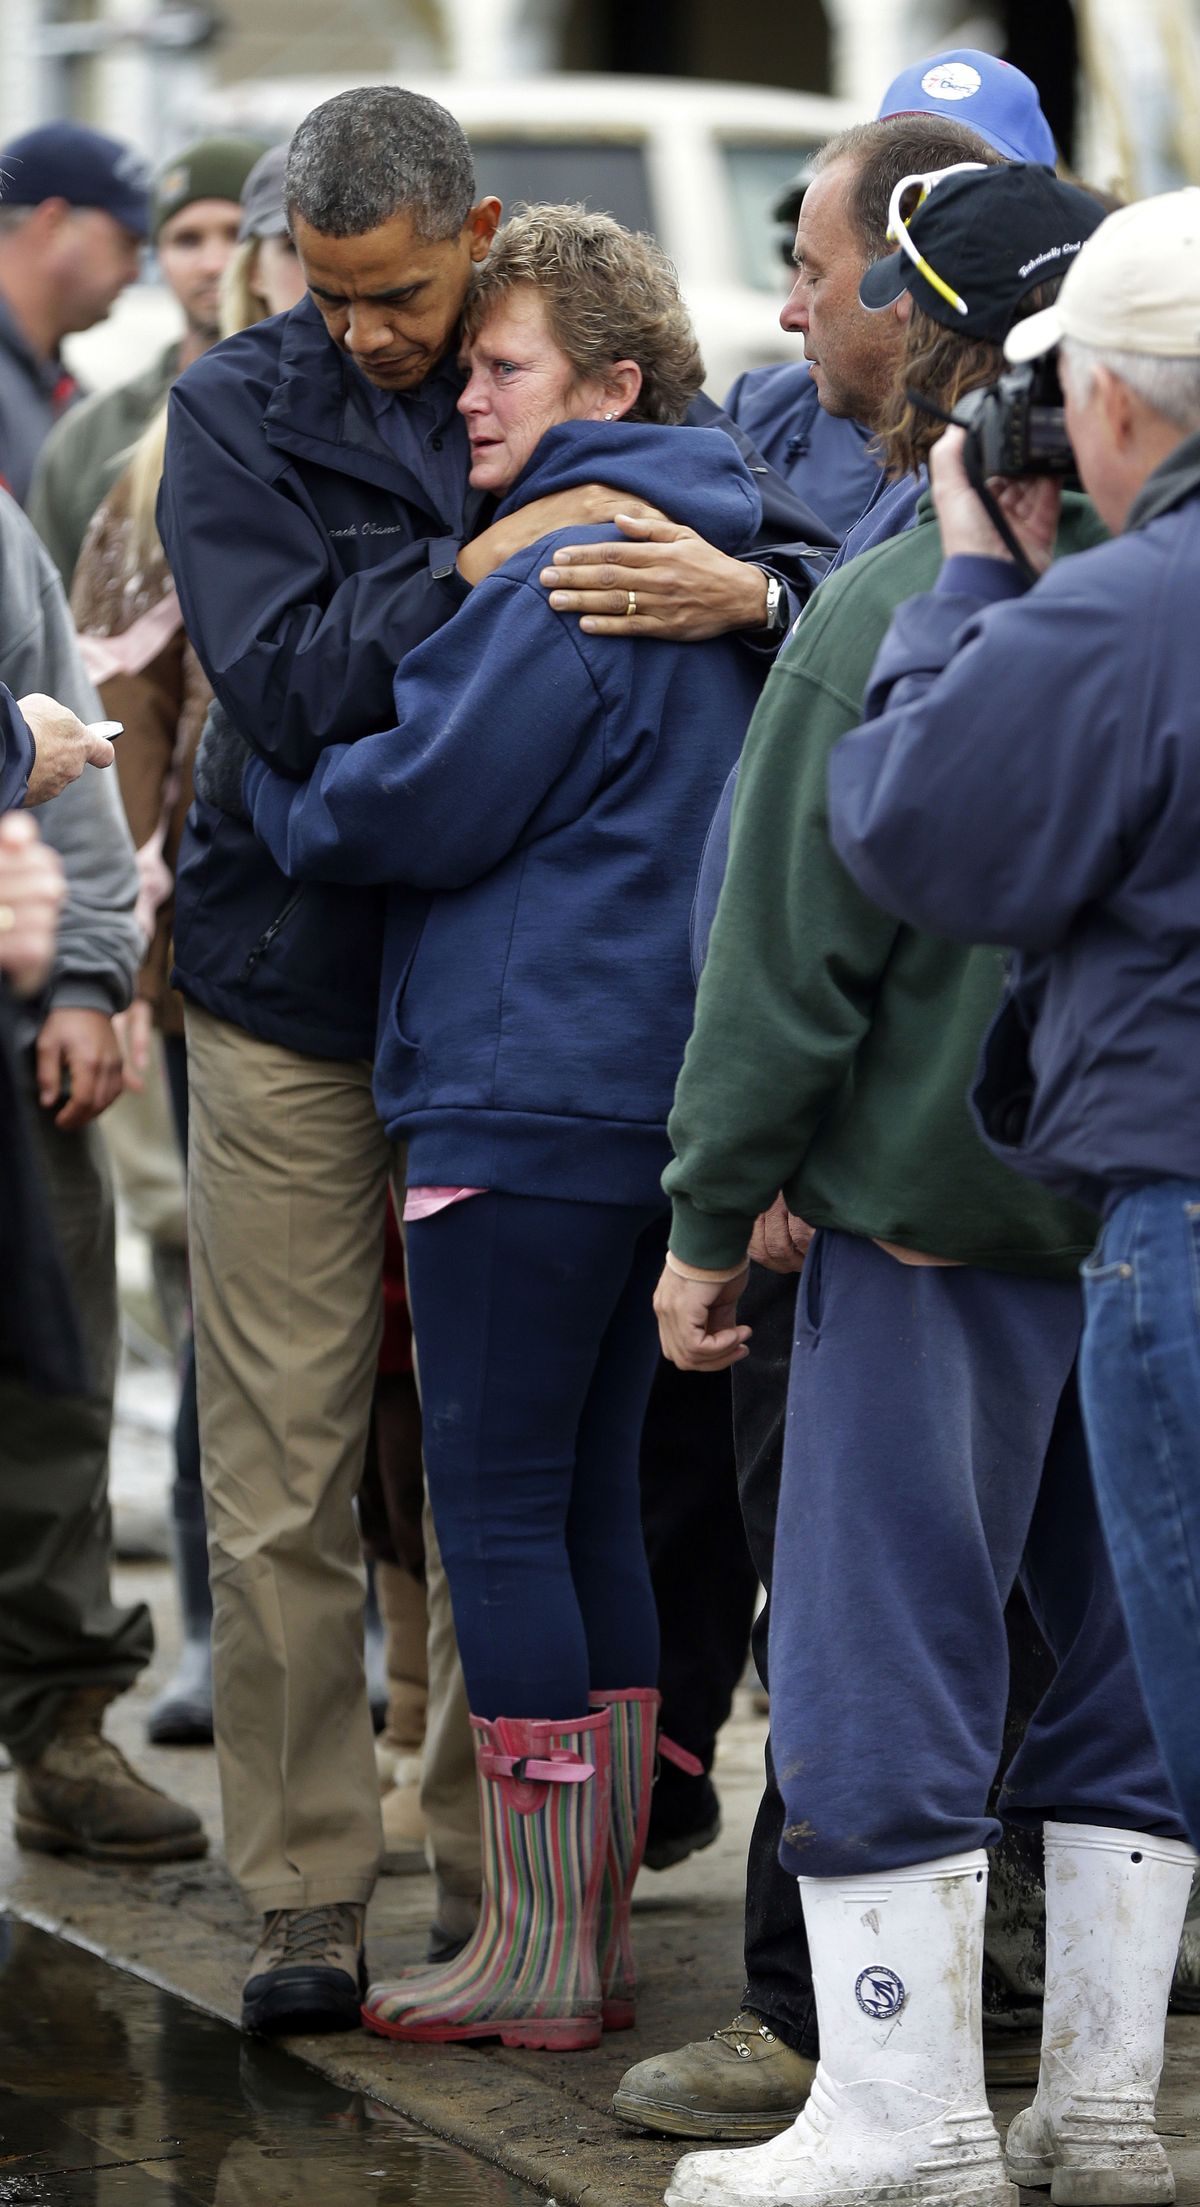 President Barack Obama, left, embraces Donna Vanzant, right, during a tour of an area effected by superstorm Sandy, Wednesday, Oct. 31, 2012, in Brigantine, N.J.  Vanzant is a owner of North Point Marina, which was damaged by the storm. (Pablo Monsivais / Associated Press)